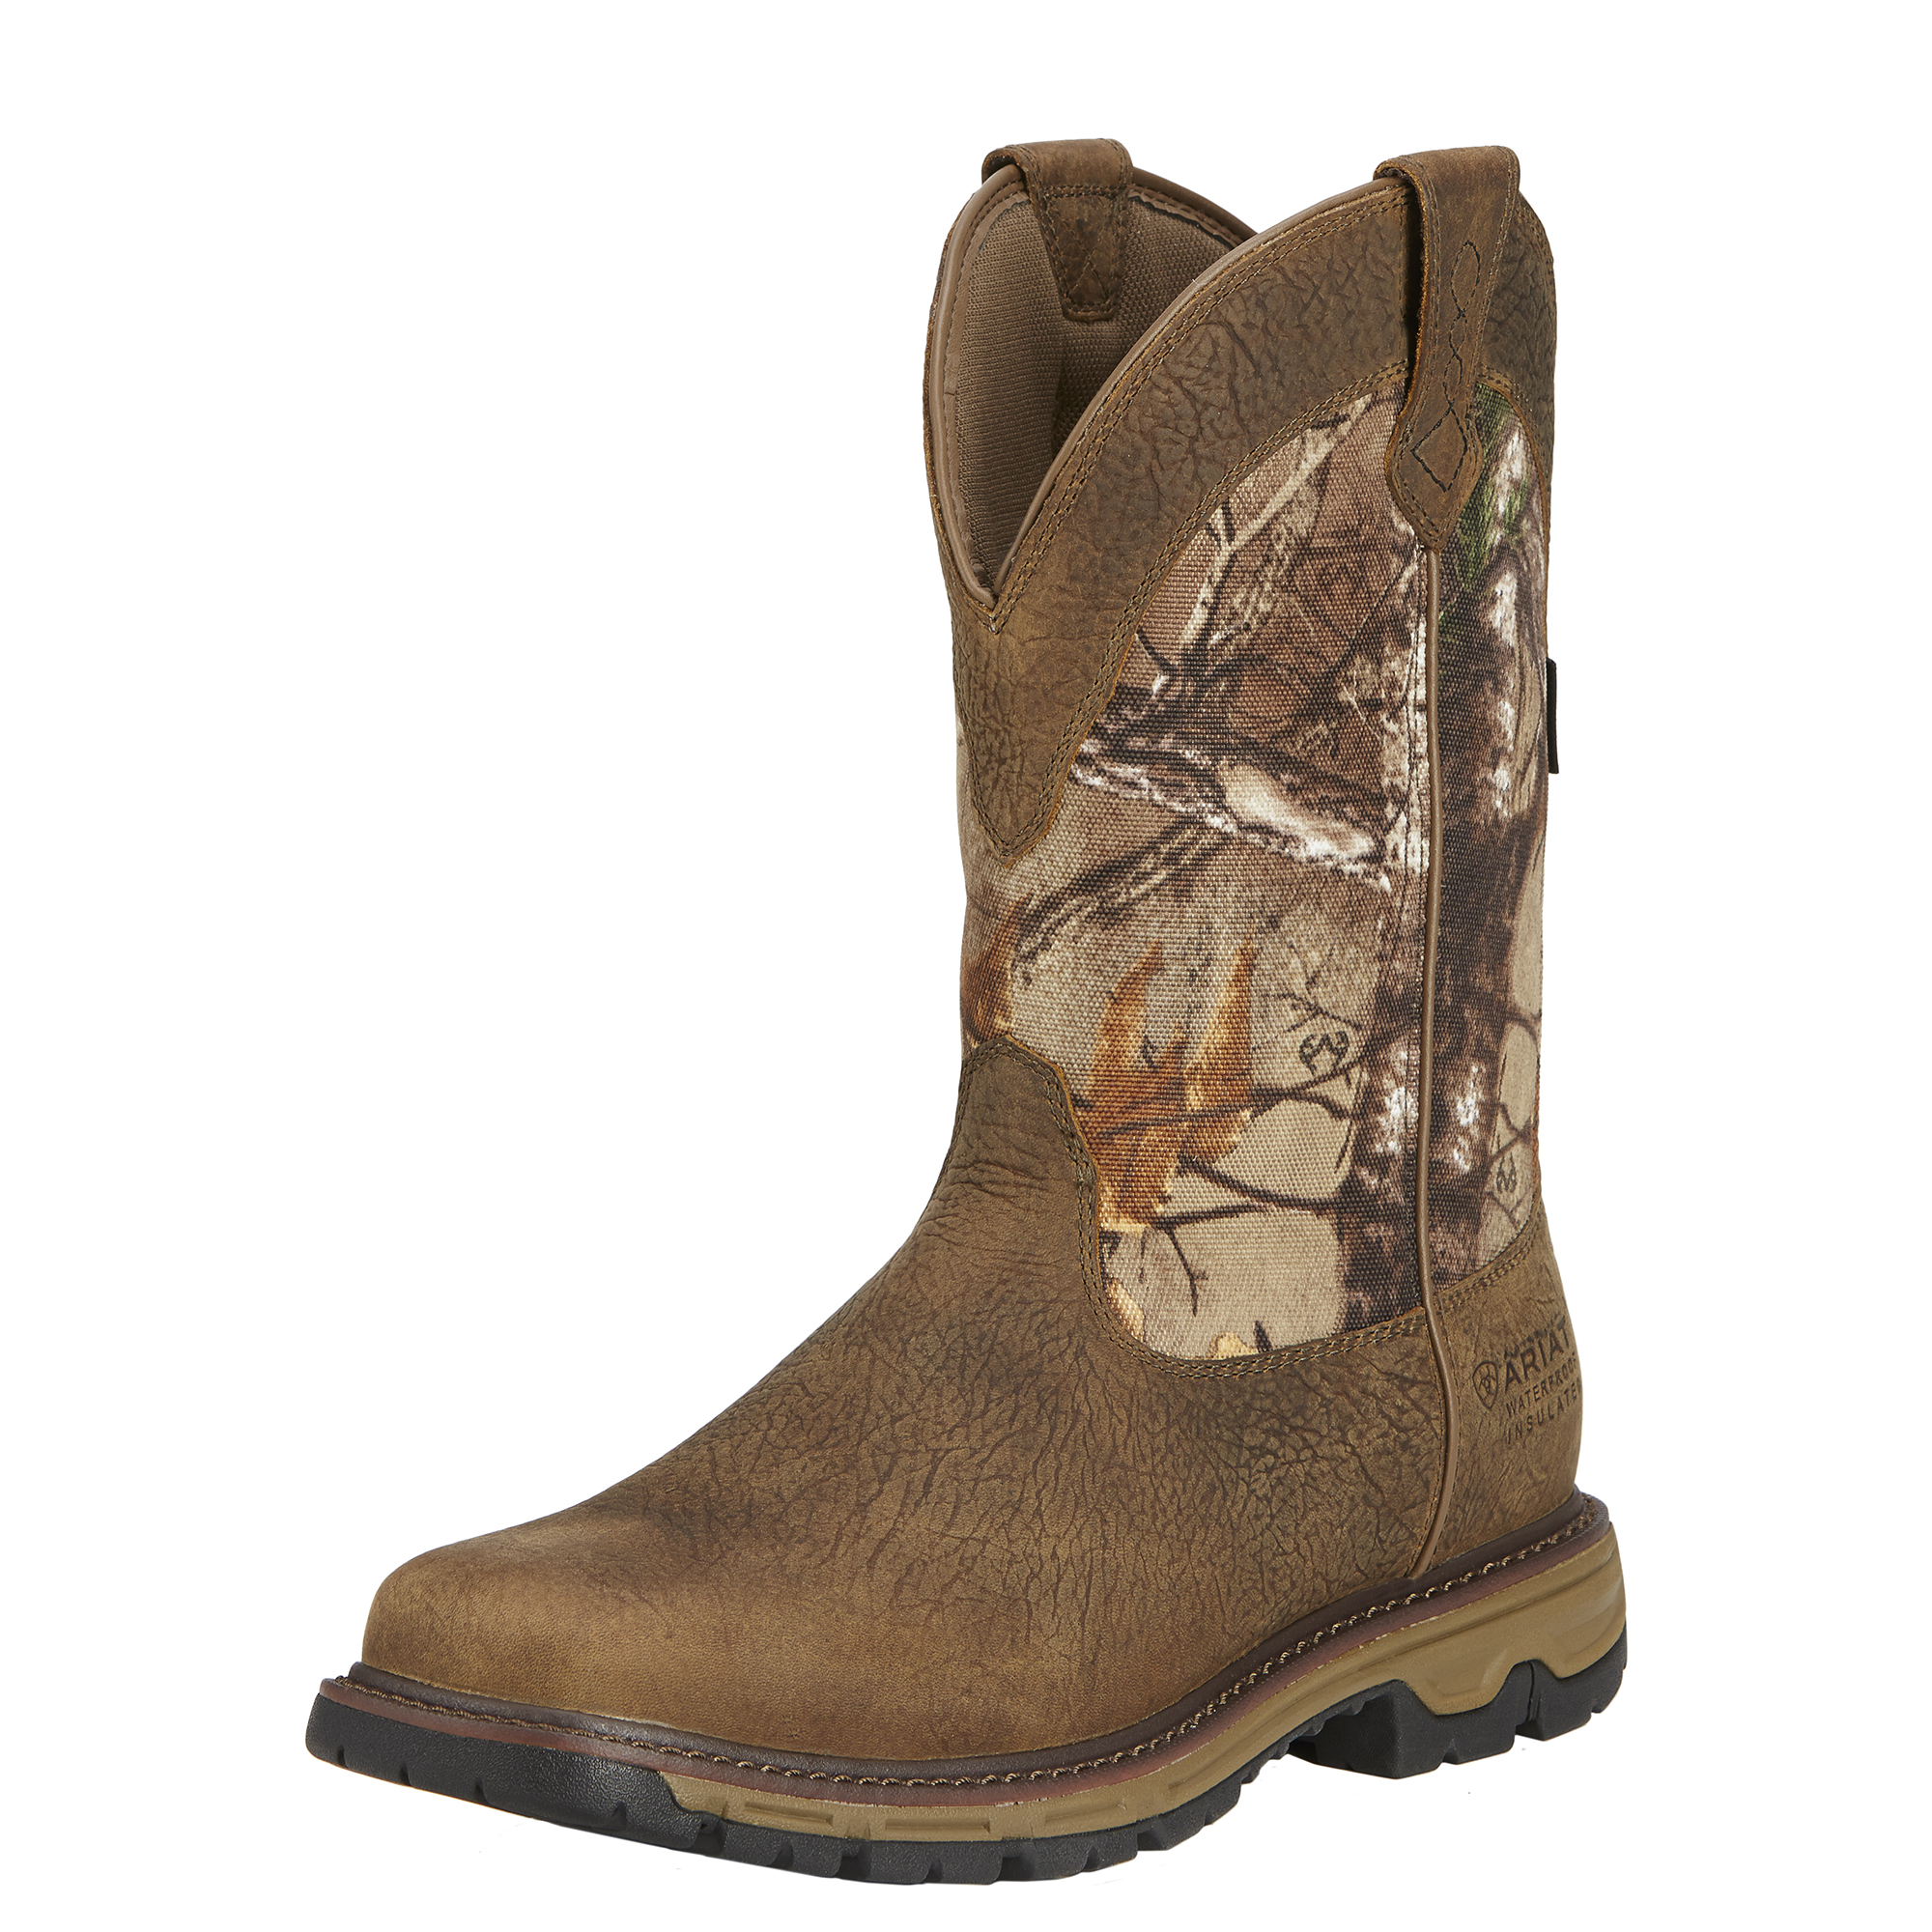 Pungo Ridge - Ariat Men's Conquest Pull-On Waterproof Hunting Boots ...